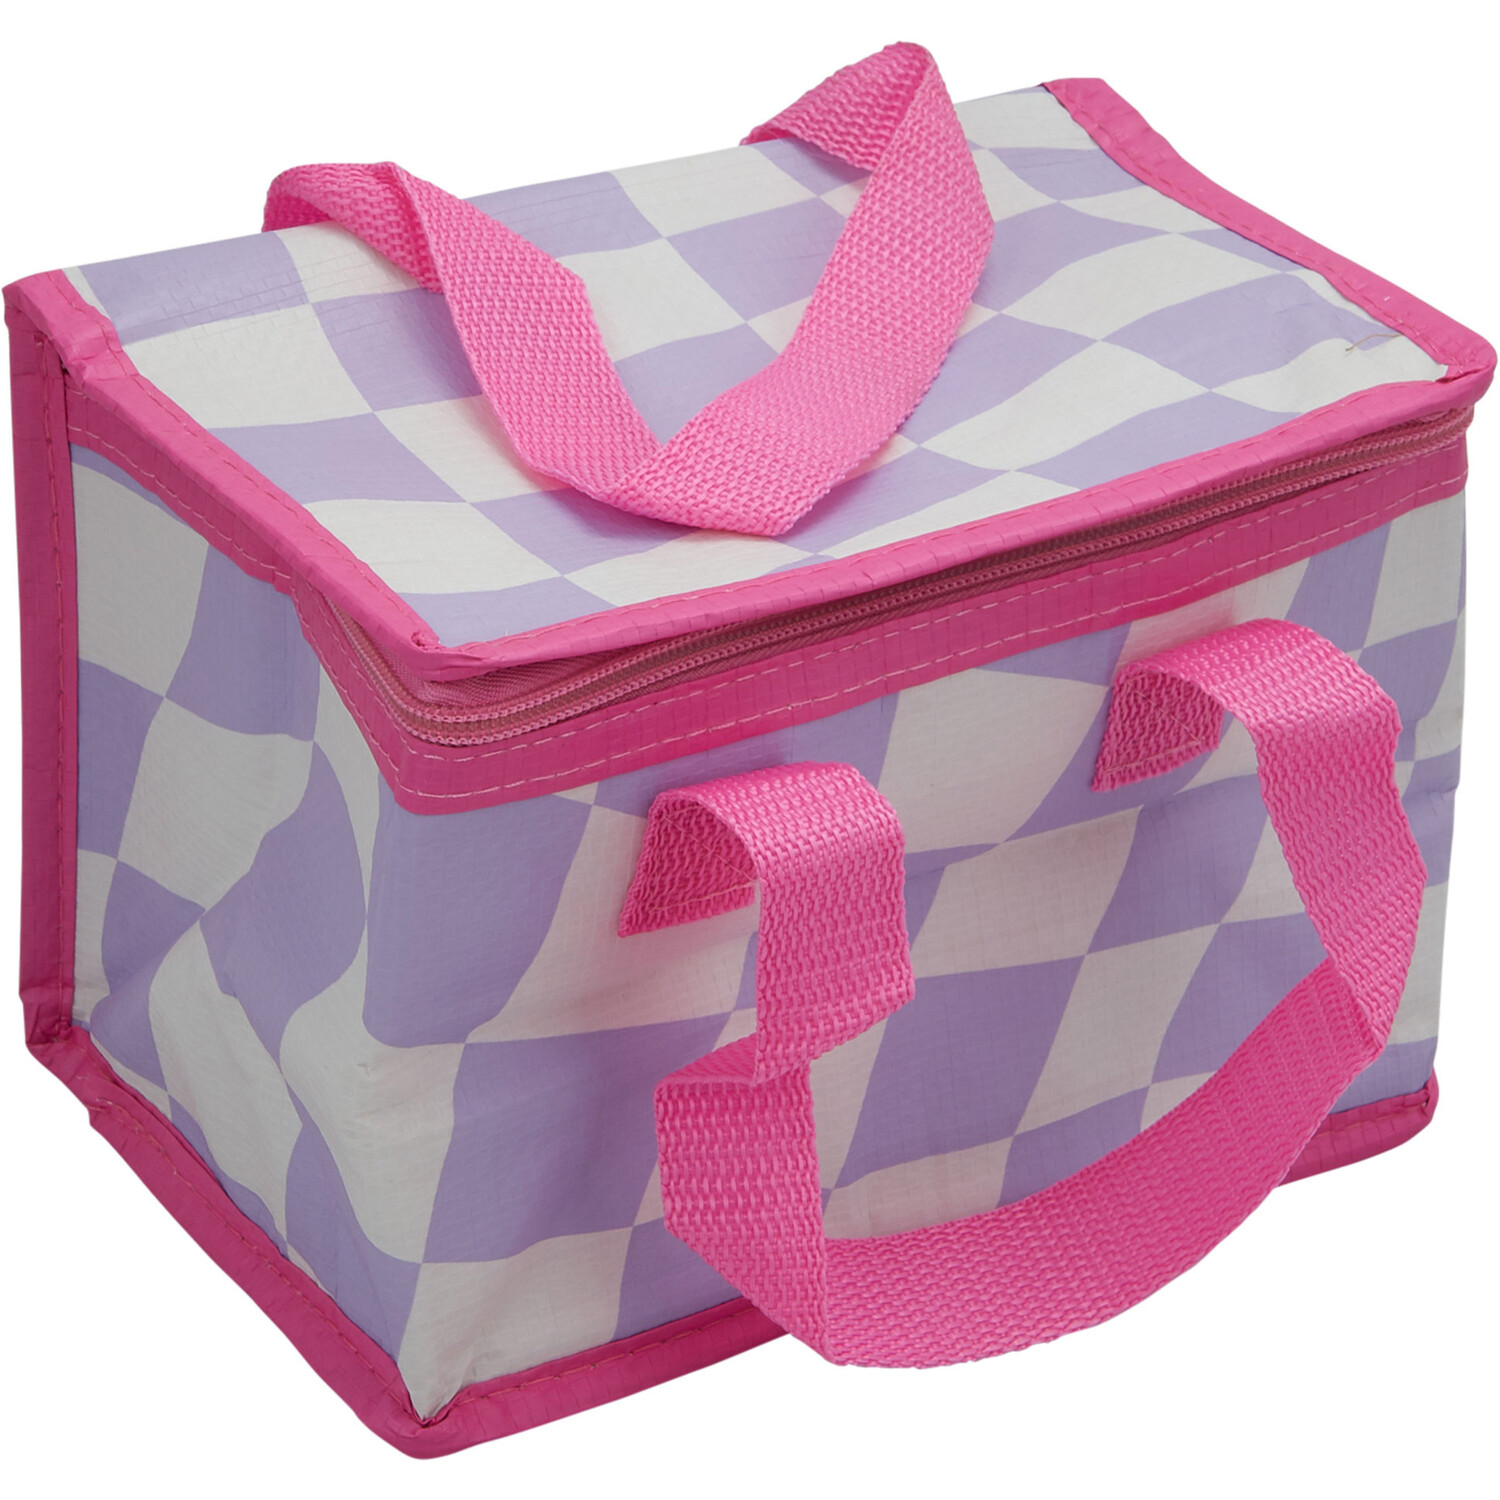 Patterned Insulated Lunch Bags Image 2